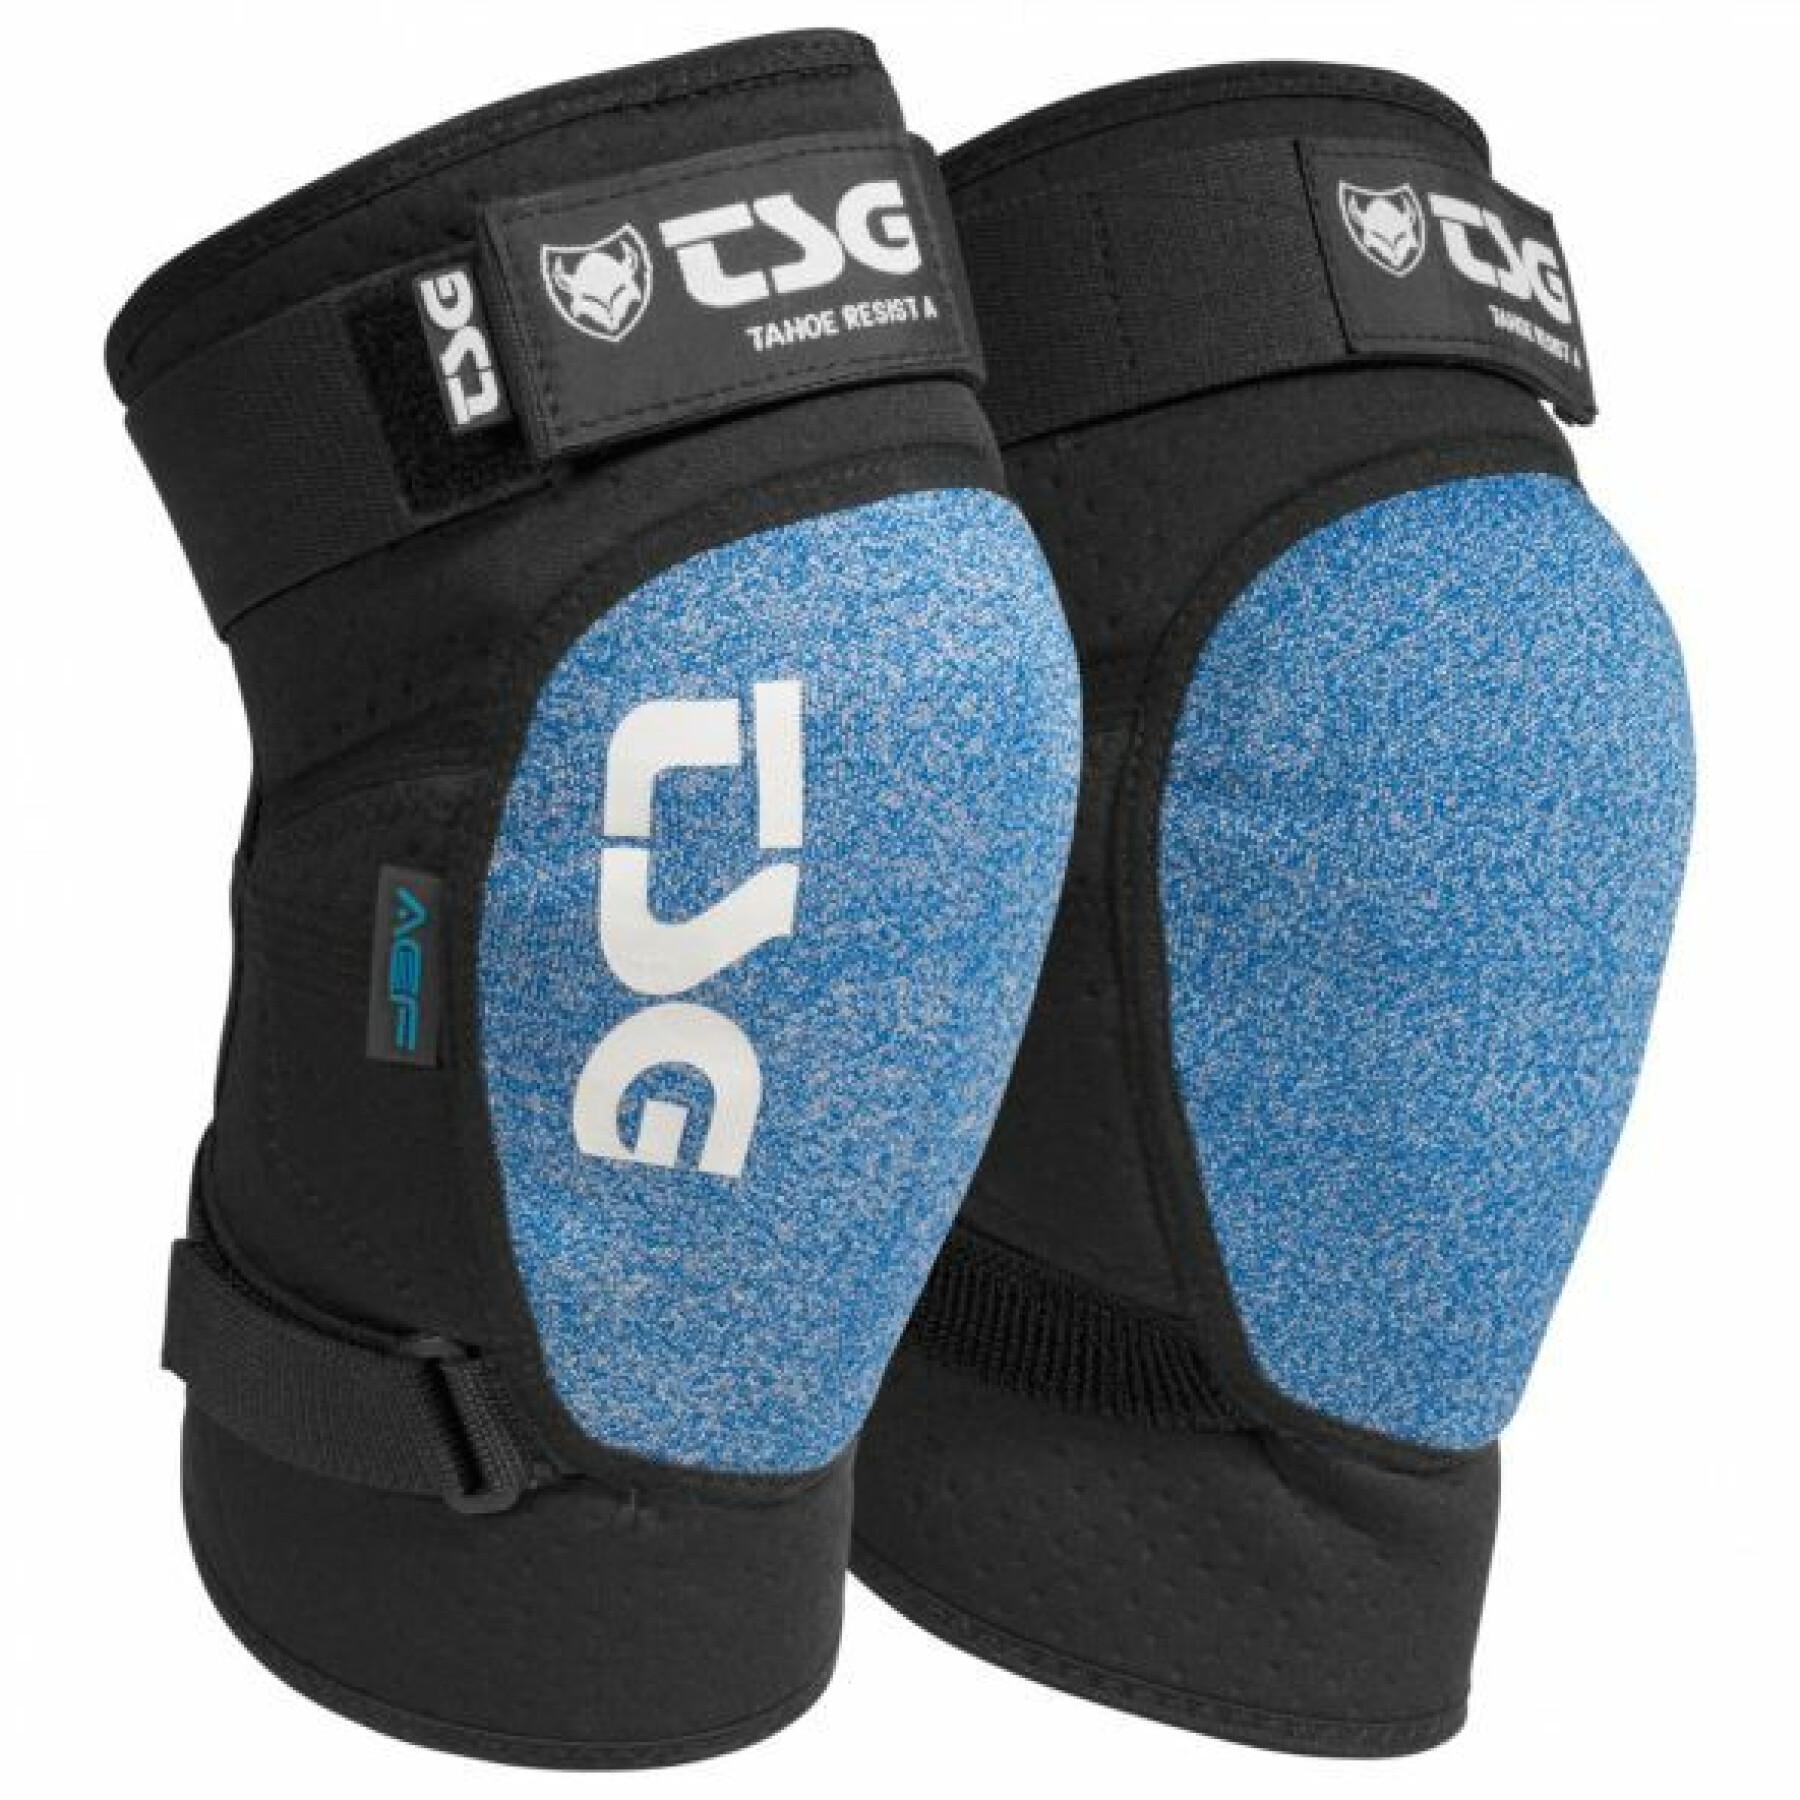 Knee protection for bicycles TSG Tahoe Resist A